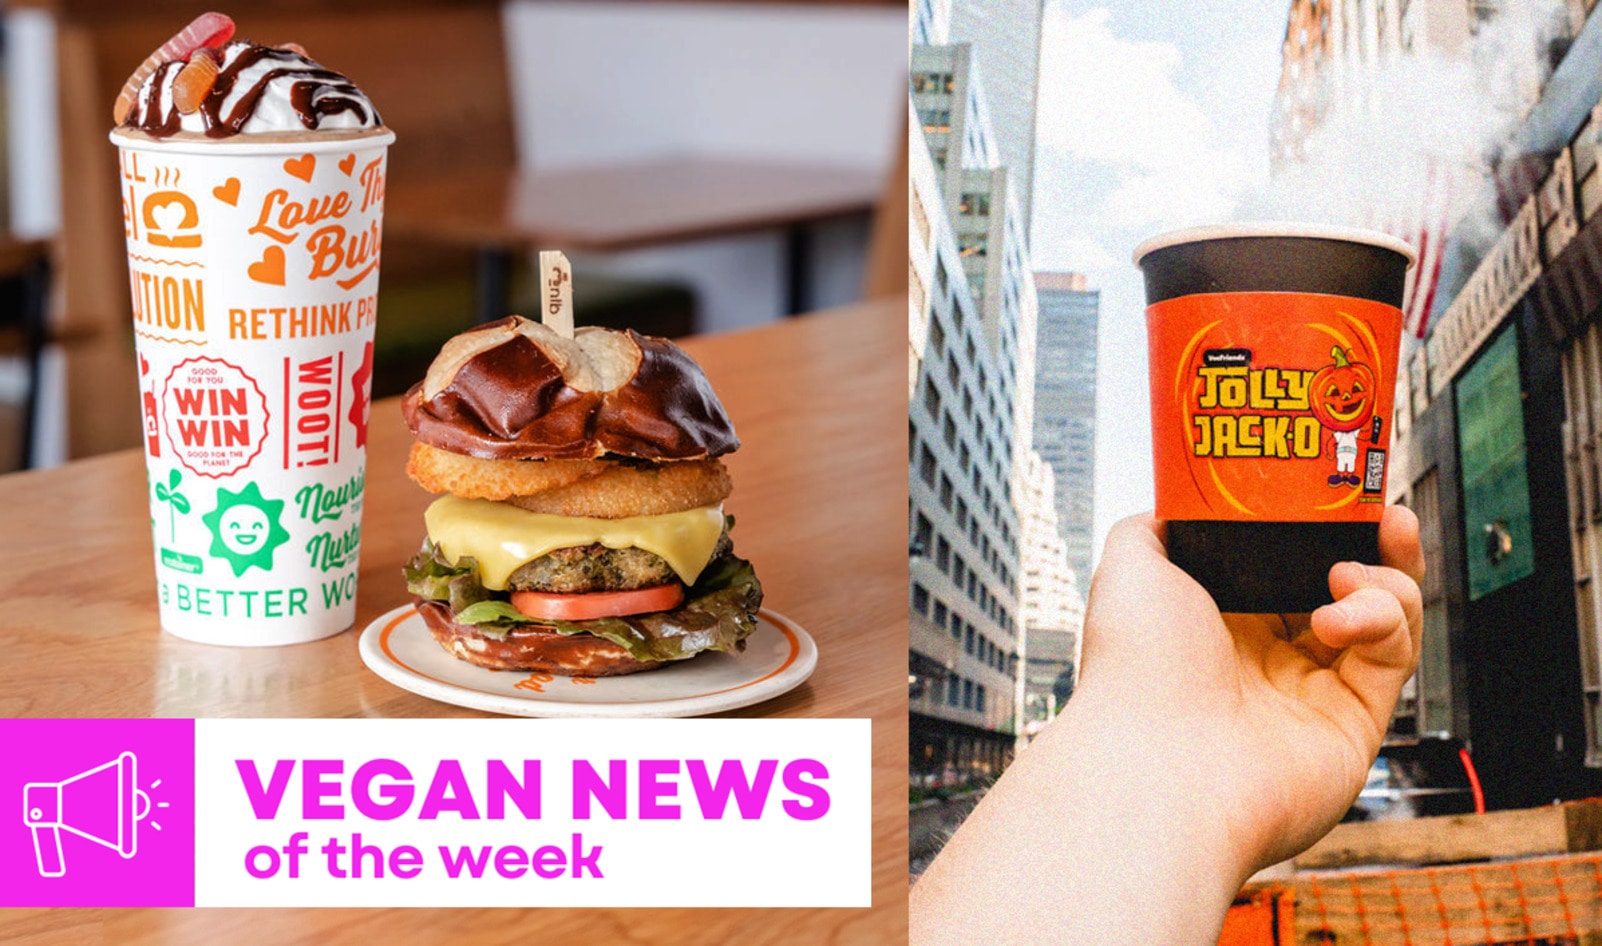 Vegan Restaurant News of the Week: Jolly Jack-o'-Lantern Lattes, Spooky Burger Specials, and More